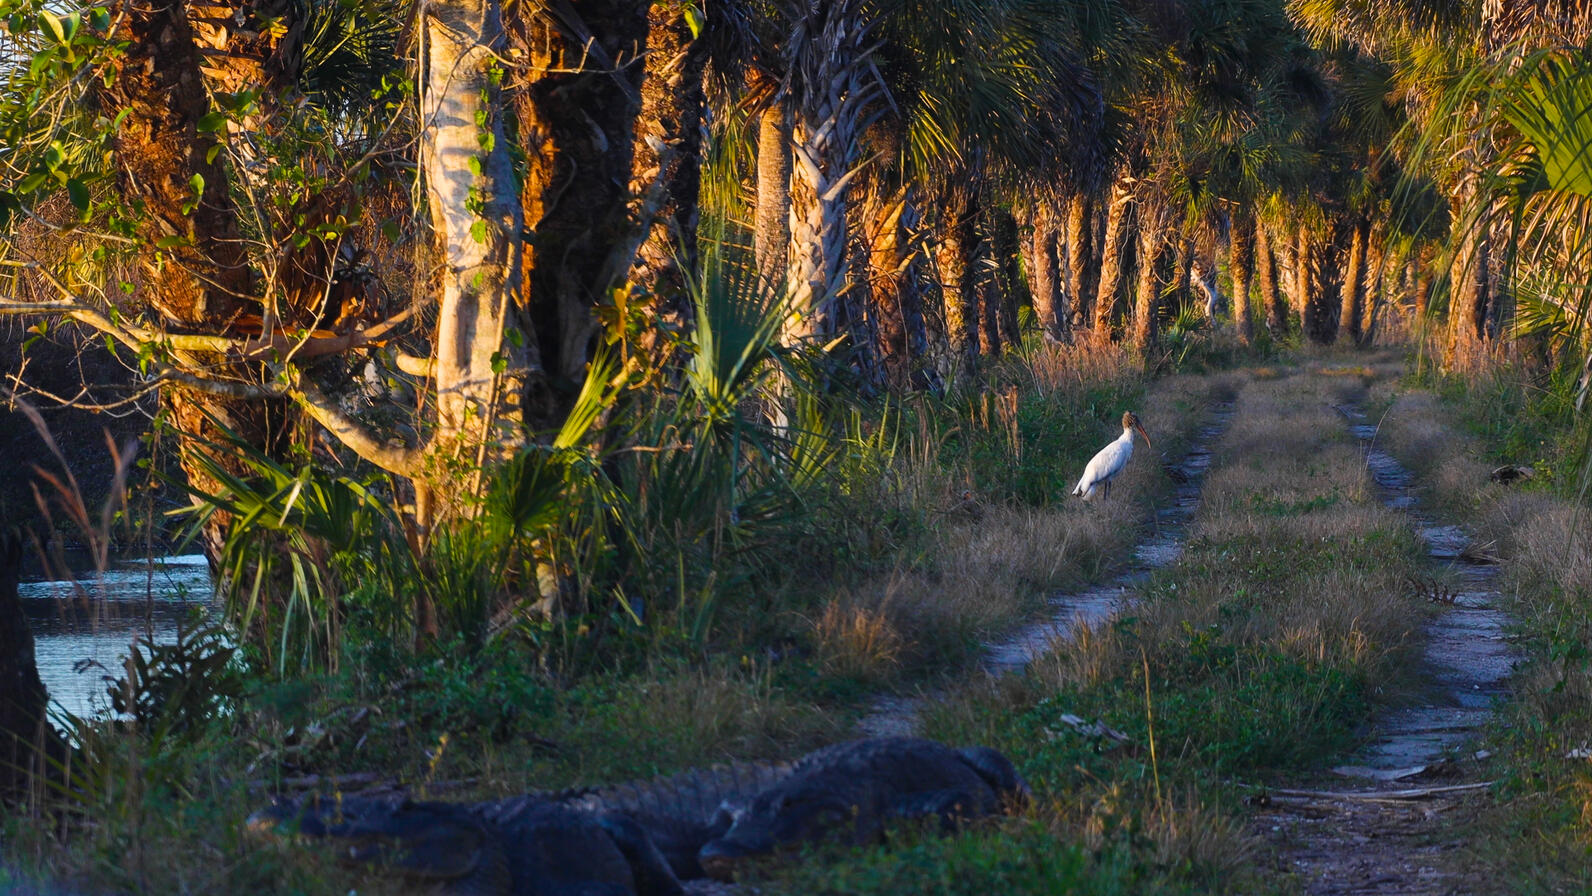 Alligator in foreground with Wood Stork in focus on back country road